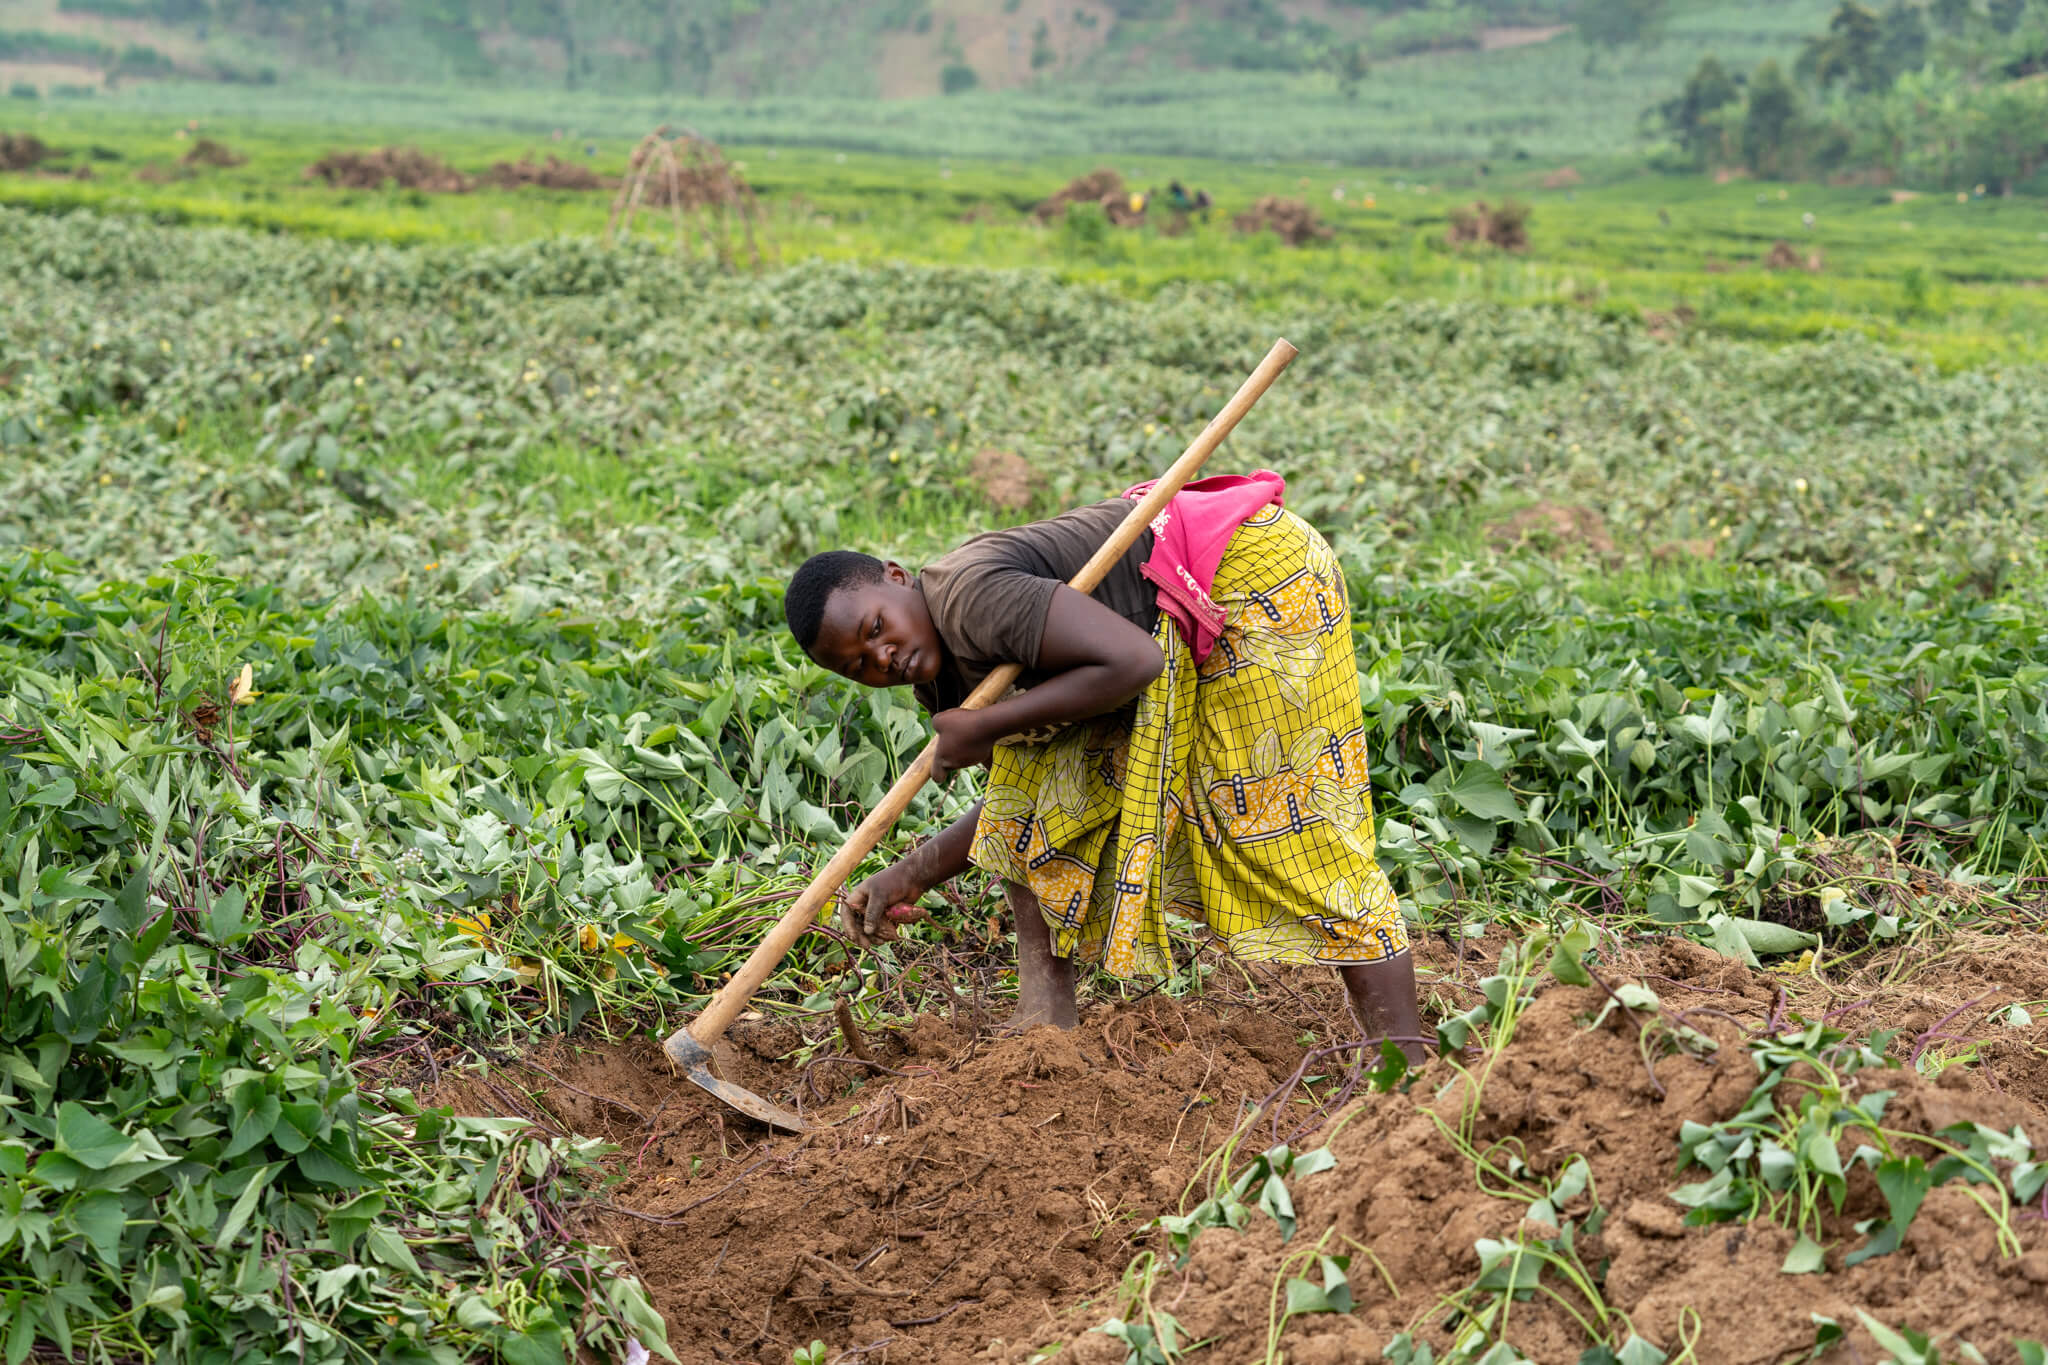 Farmers and members of the Twisungane VSLA group cultivate sweet potatoes at Pfunda Tea Estate, Rubavu, Rwanda. However, due to the recent flooding, their crops have been affected. Image: Documenting Afrika/ETP